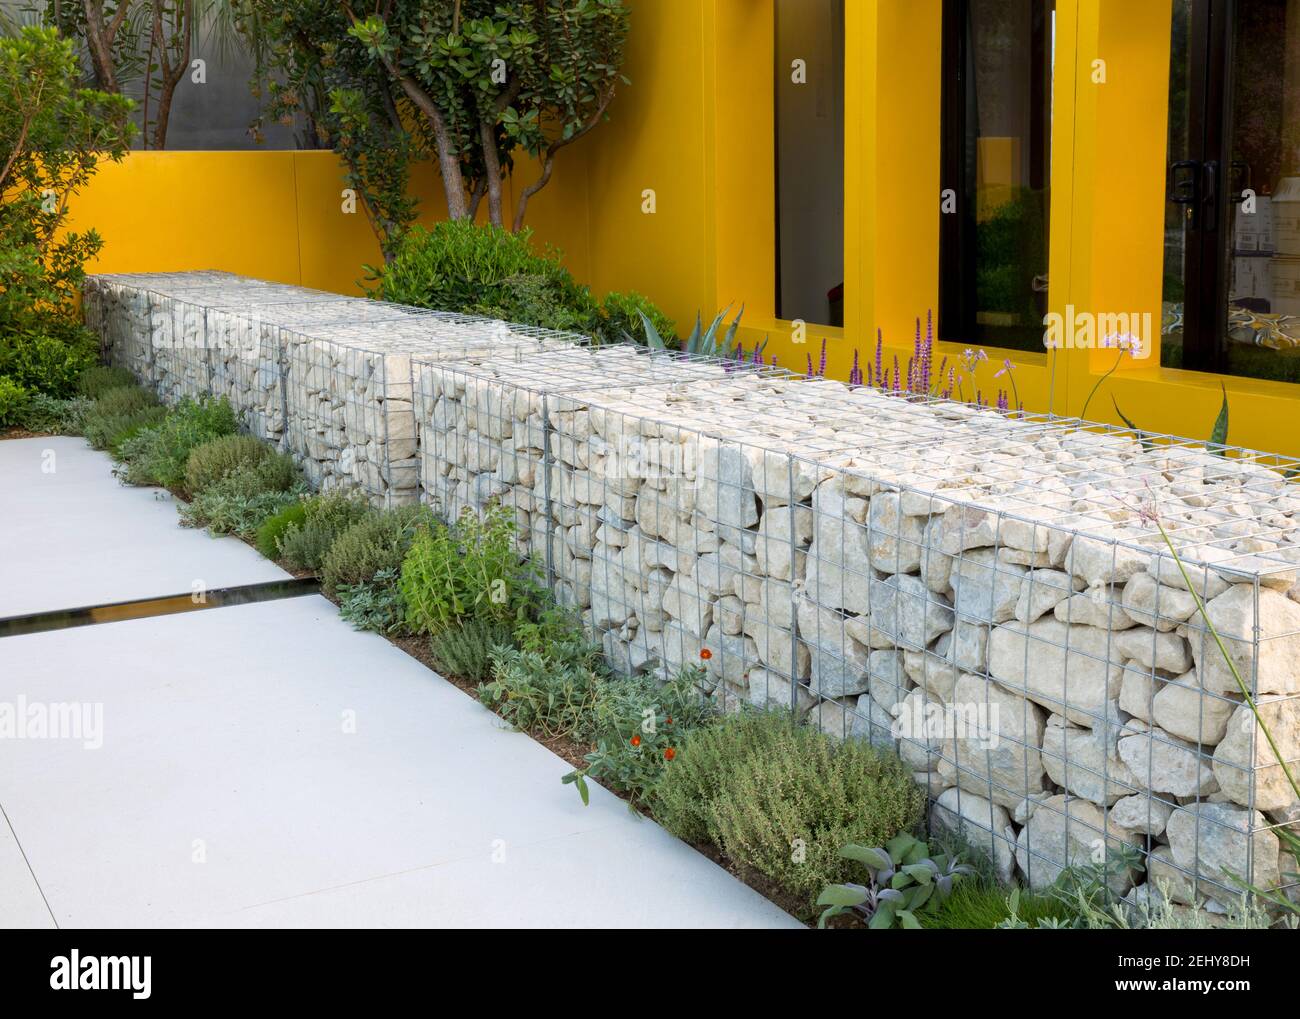 Mediterranean garden with stone filled gabion gabions wall, border of mixed herbs grey stone patio with a rill water feature England GB UK Stock Photo